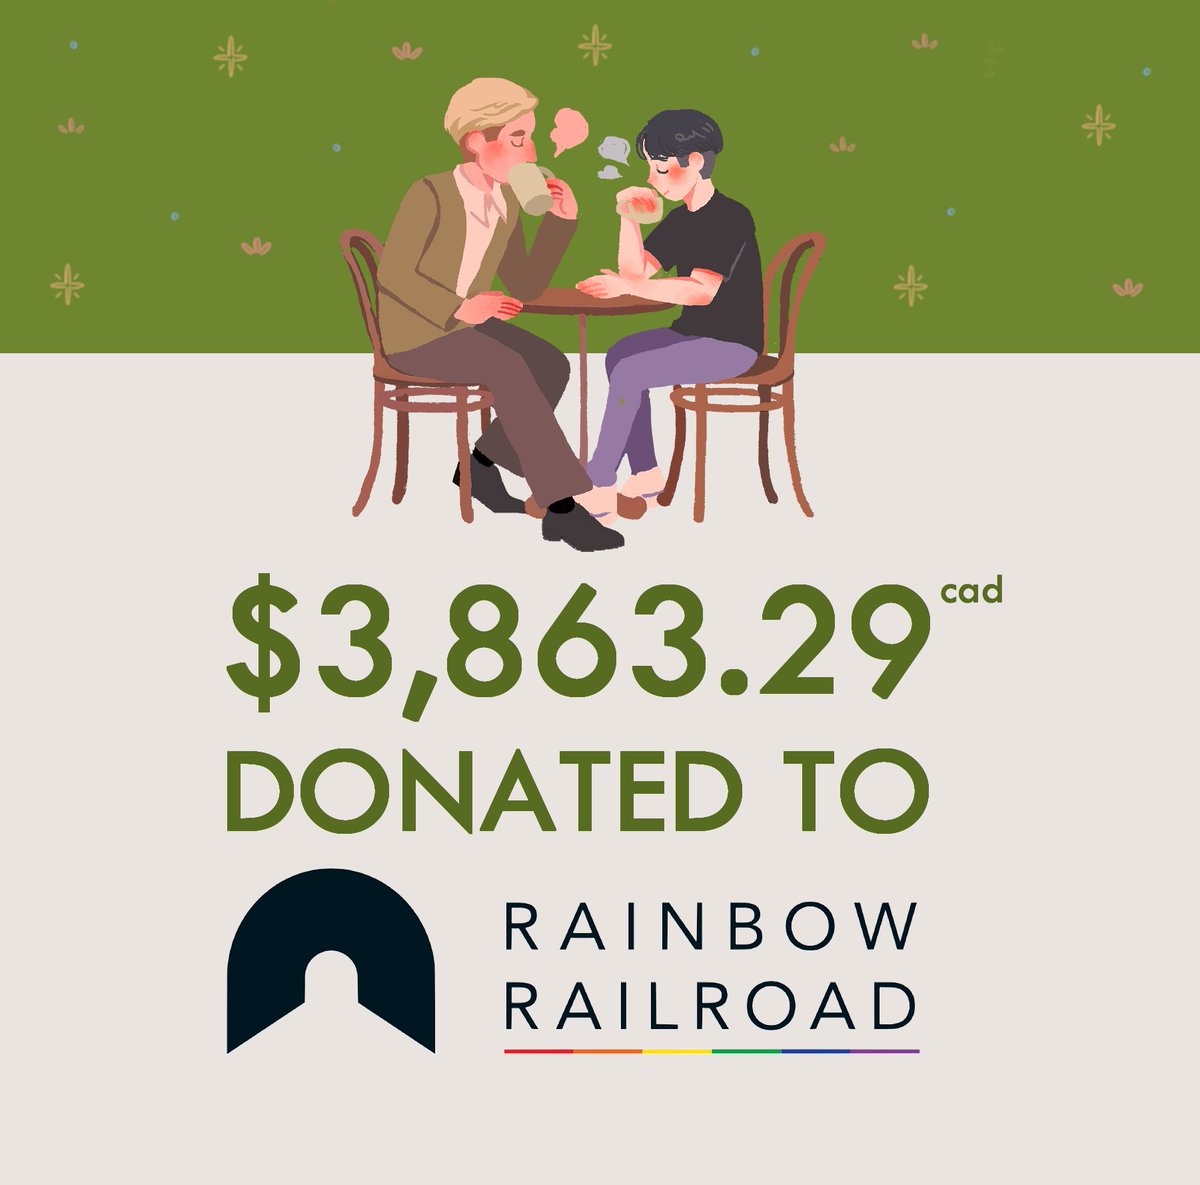 🕊 Thanks to everyone's support, we are happy to donate $3863.29 CAD to @RainbowRailroad, an organization dedicated to helping LGBTQ+ people around the world. —Learn more about their mission at: rainbowrailroad.org !